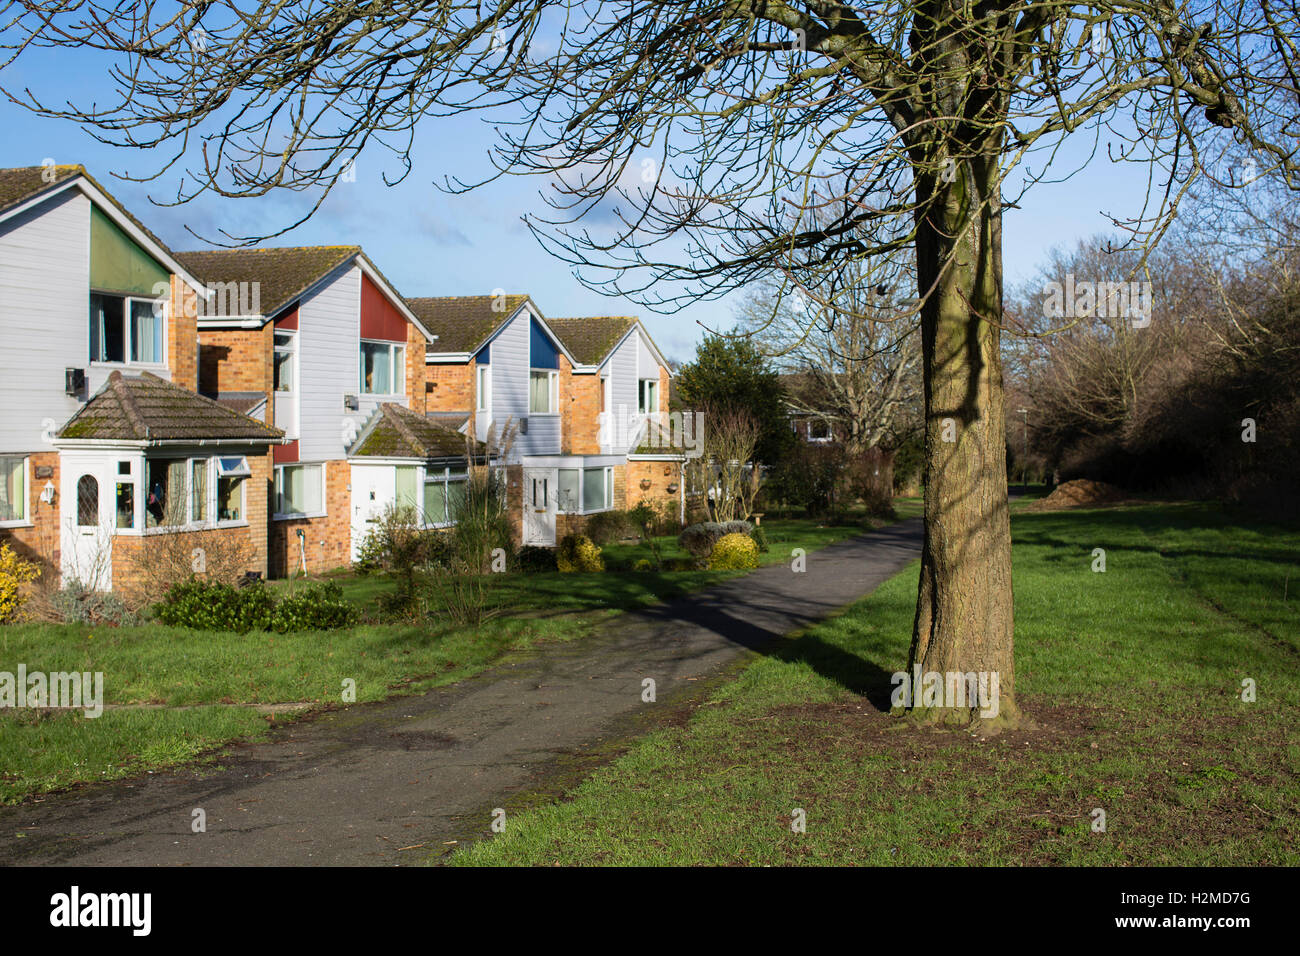 A housing estate in the Uk town of Basingstoke with leafless winter trees casting shadows across the buildings and grass. Stock Photo